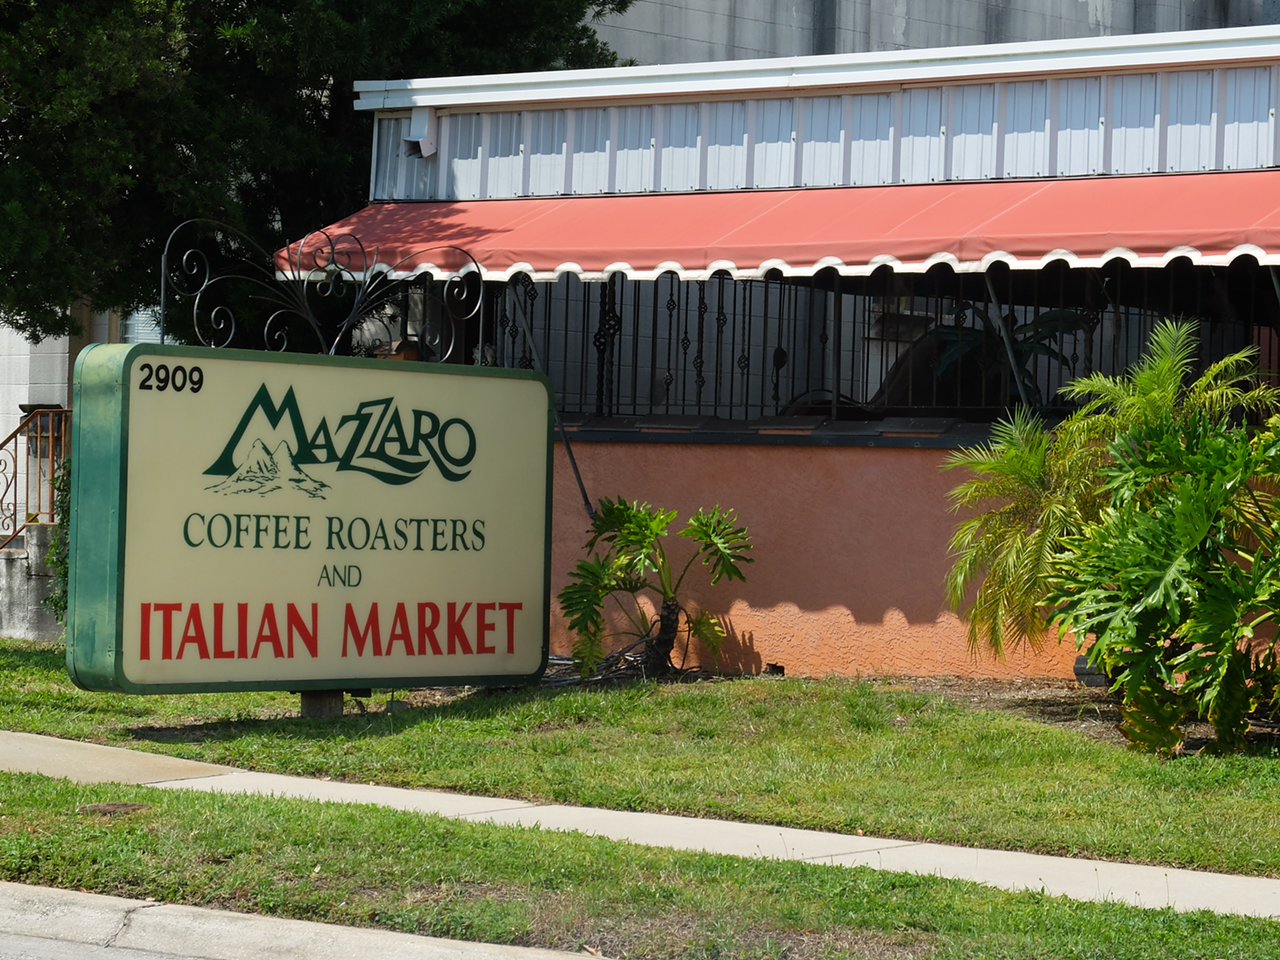 Mazzaro’s Italian Market  
2909 22nd Ave. N, St. Petersburg, 727-321-2400
One of Tampa Bay's most popular markets, Mazzaro's has won a slew of Best of the Bay awards over the years, and is known for its dramatic unveilings of comically-sized foods—including a 40-foot loaf of bread it donated to the Dalí Museum in 2021 and its 854-pound hunk of provolone it sliced into in 2022. Be prepared for crowds.
Photo via Cathy Salustri